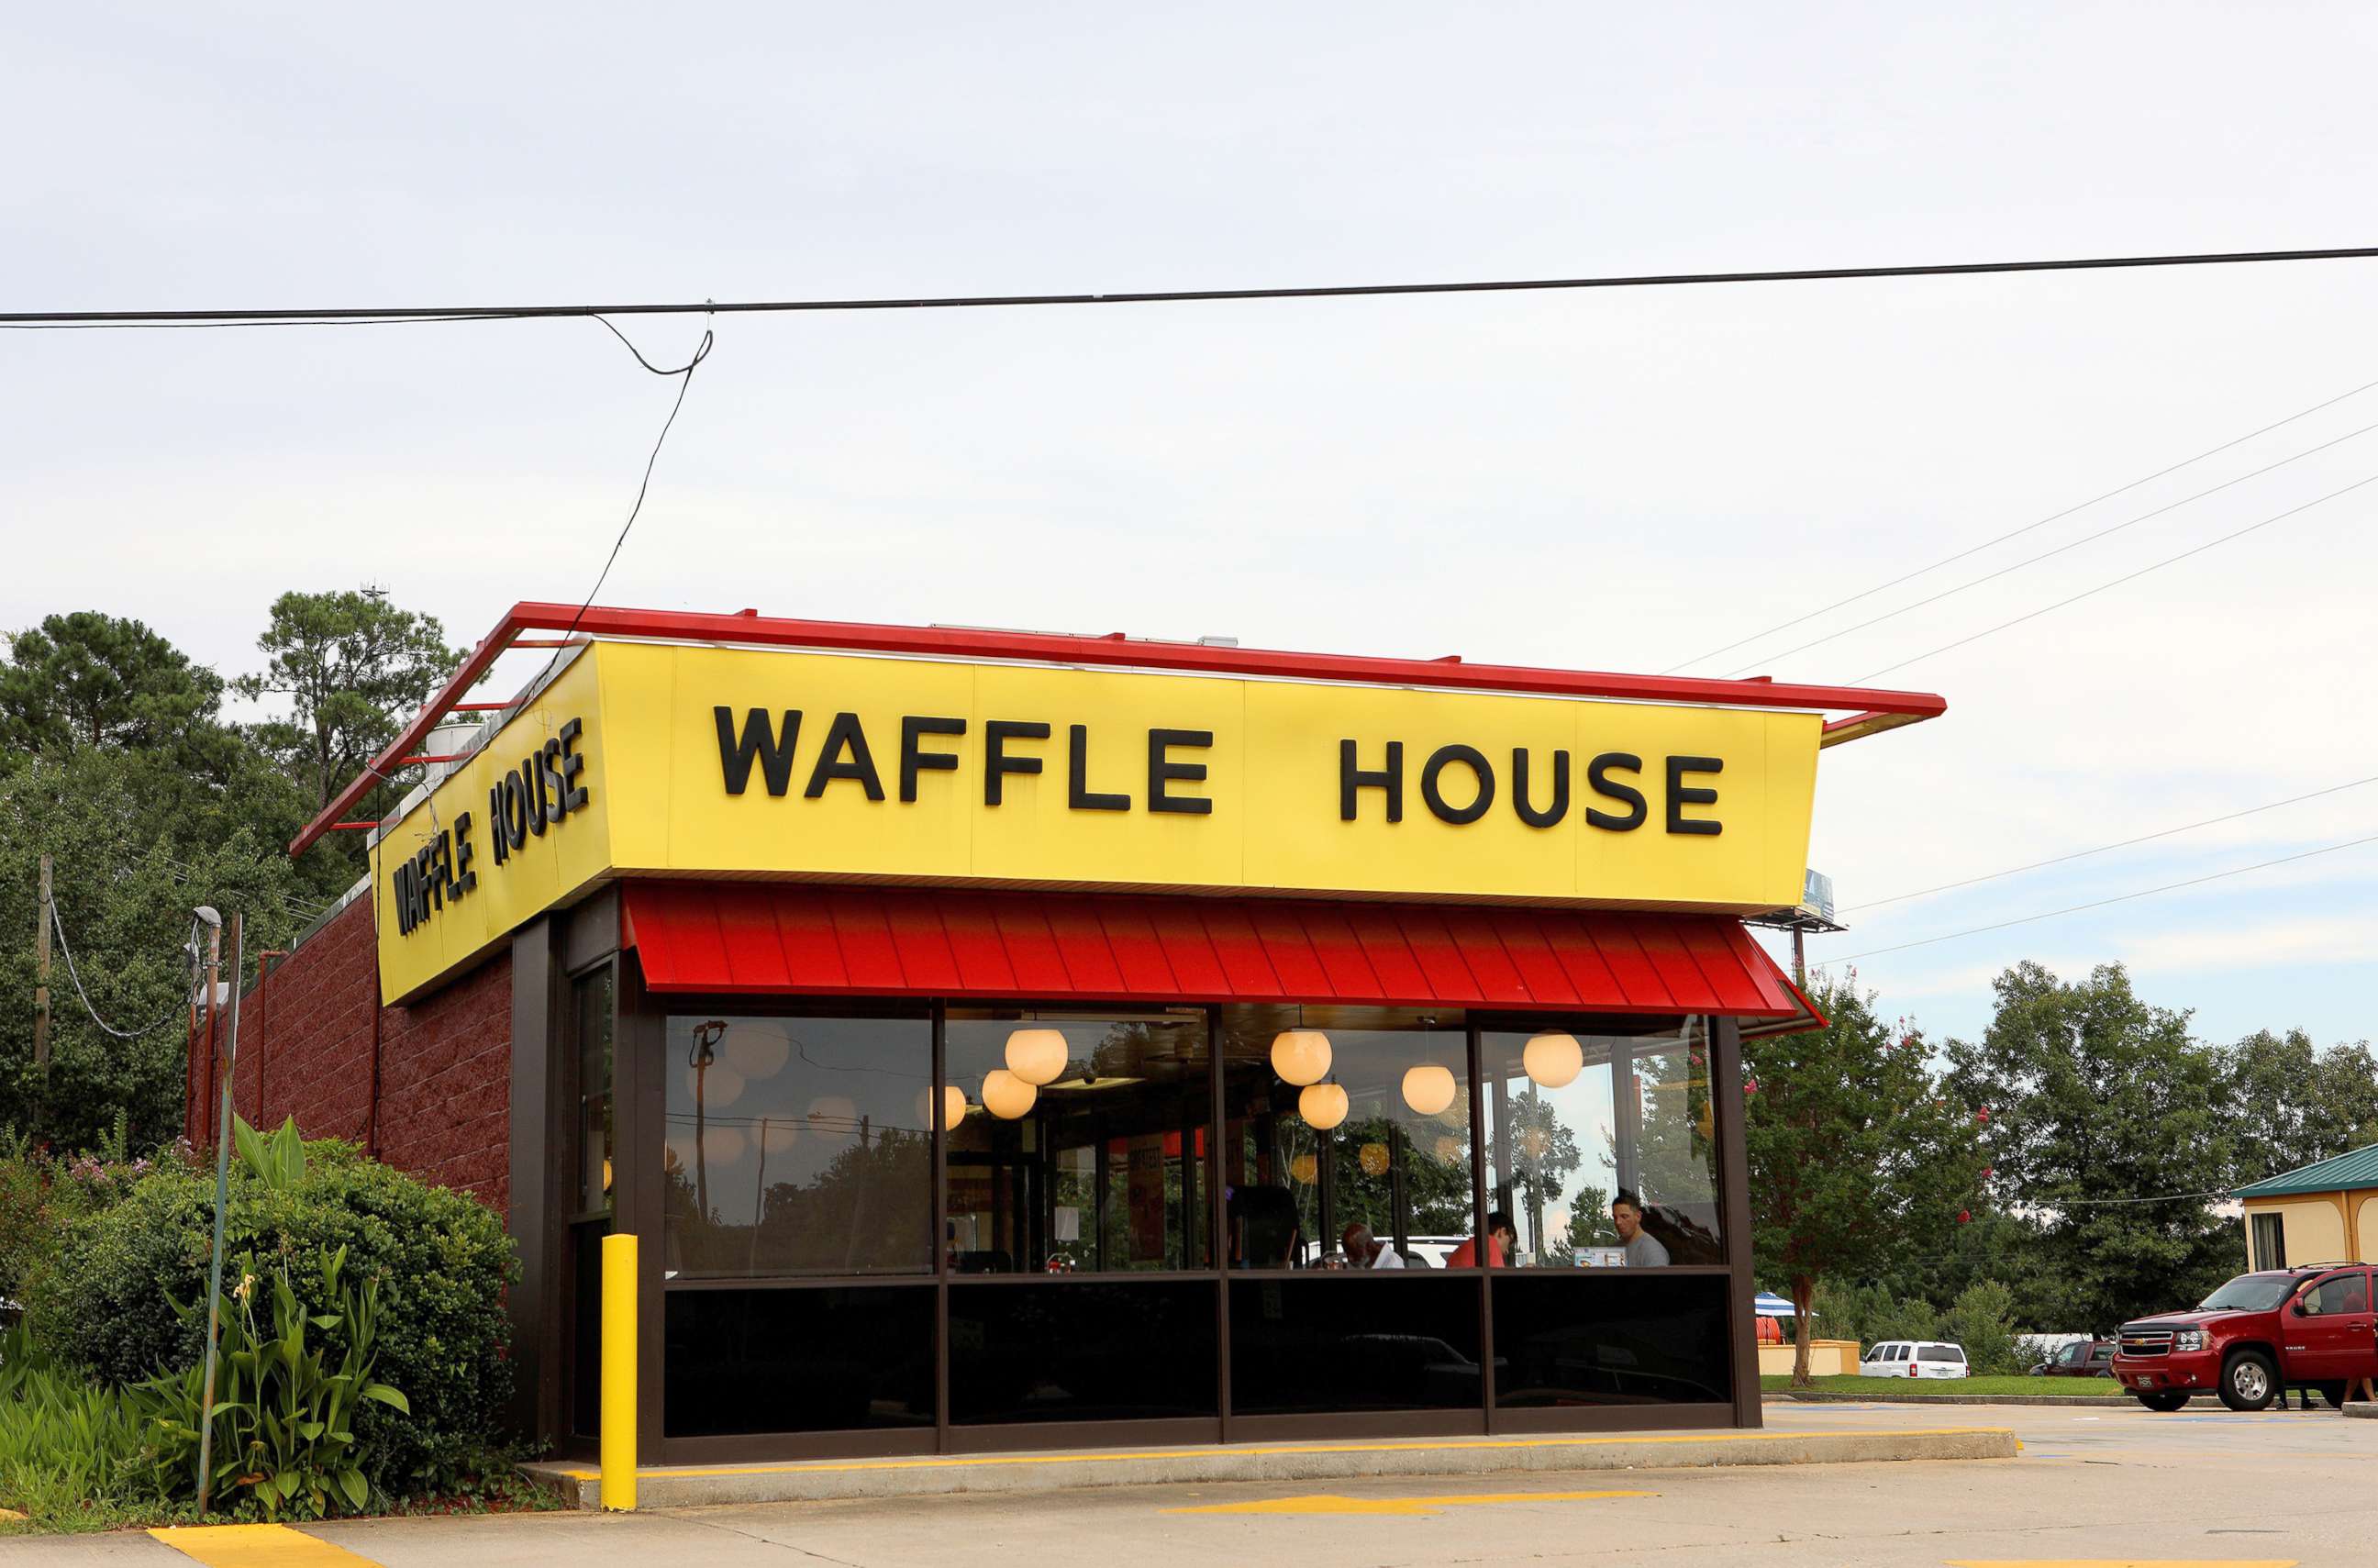 PHOTO: A Waffle House restaurant in Auburn, Alabama, is shown in this July 6, 2018, file photo.